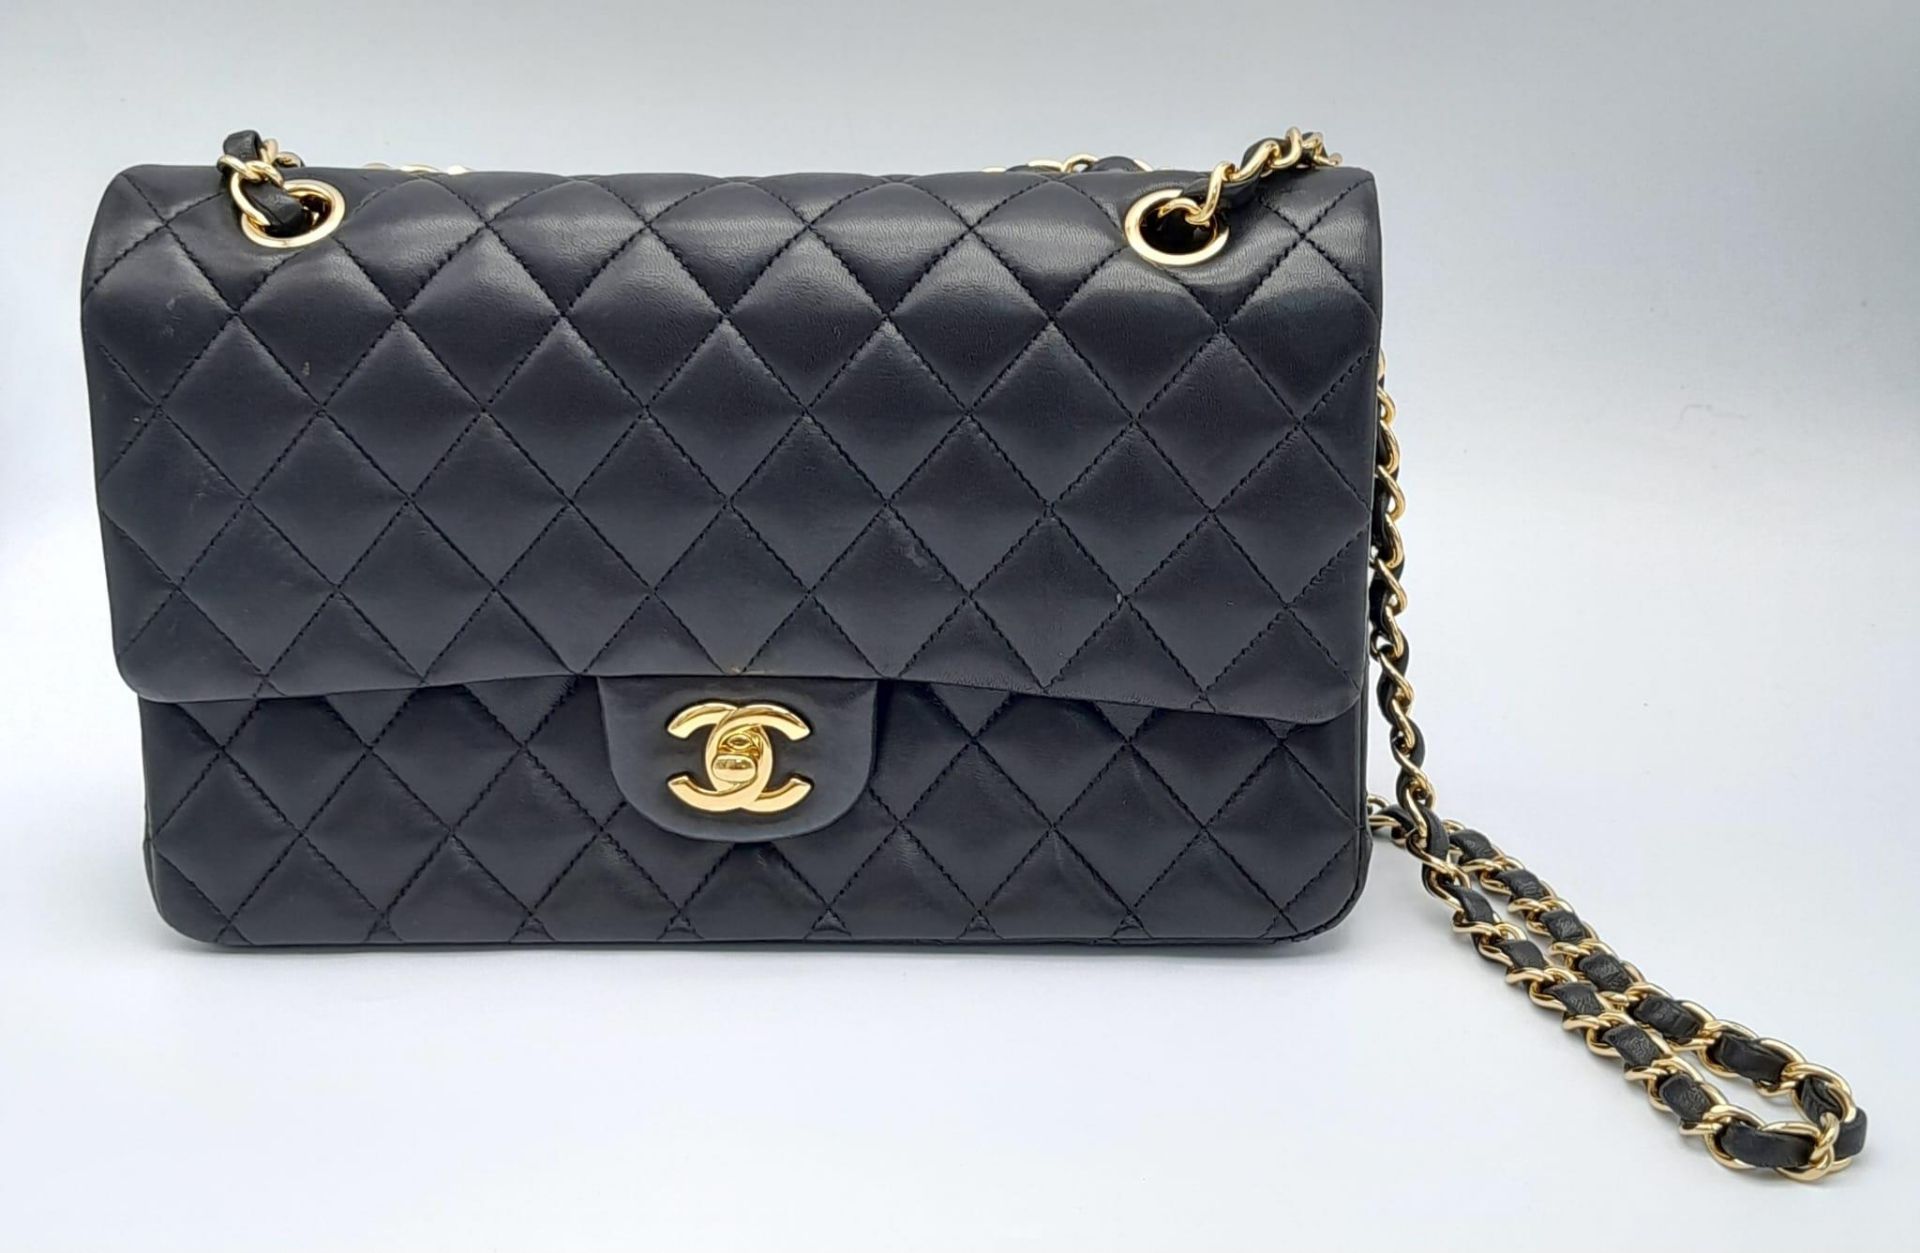 A Classic Chanel Double Flap Bag. Quilted lambskin black leather exterior with gilded Chanel logo